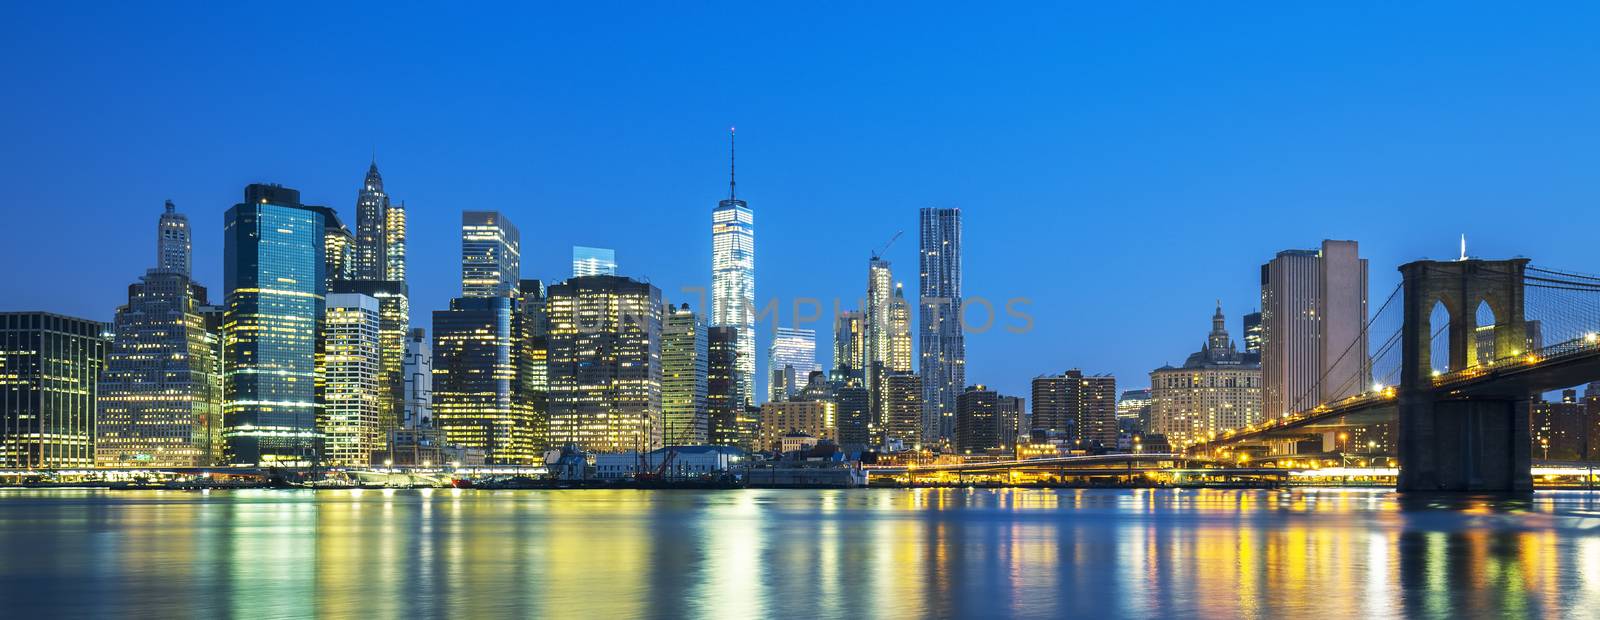 Panoramic view of New York City Manhattan midtown at dusk by vwalakte